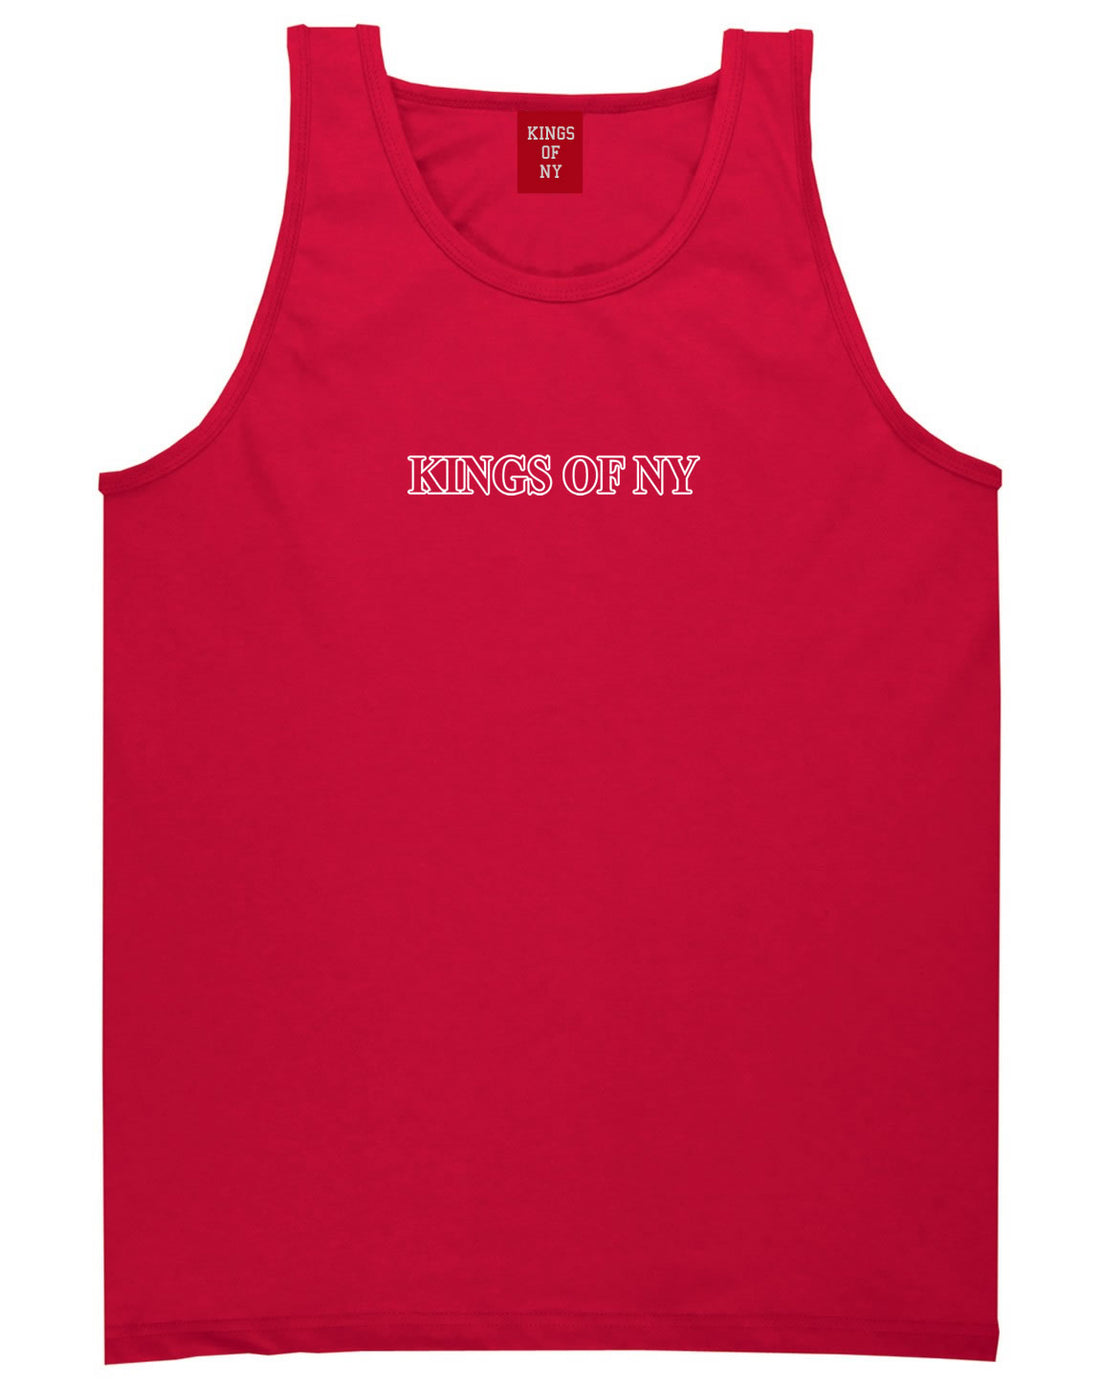 Kings Of NY Outline Classic Logo Mens Tank Top Shirt Red